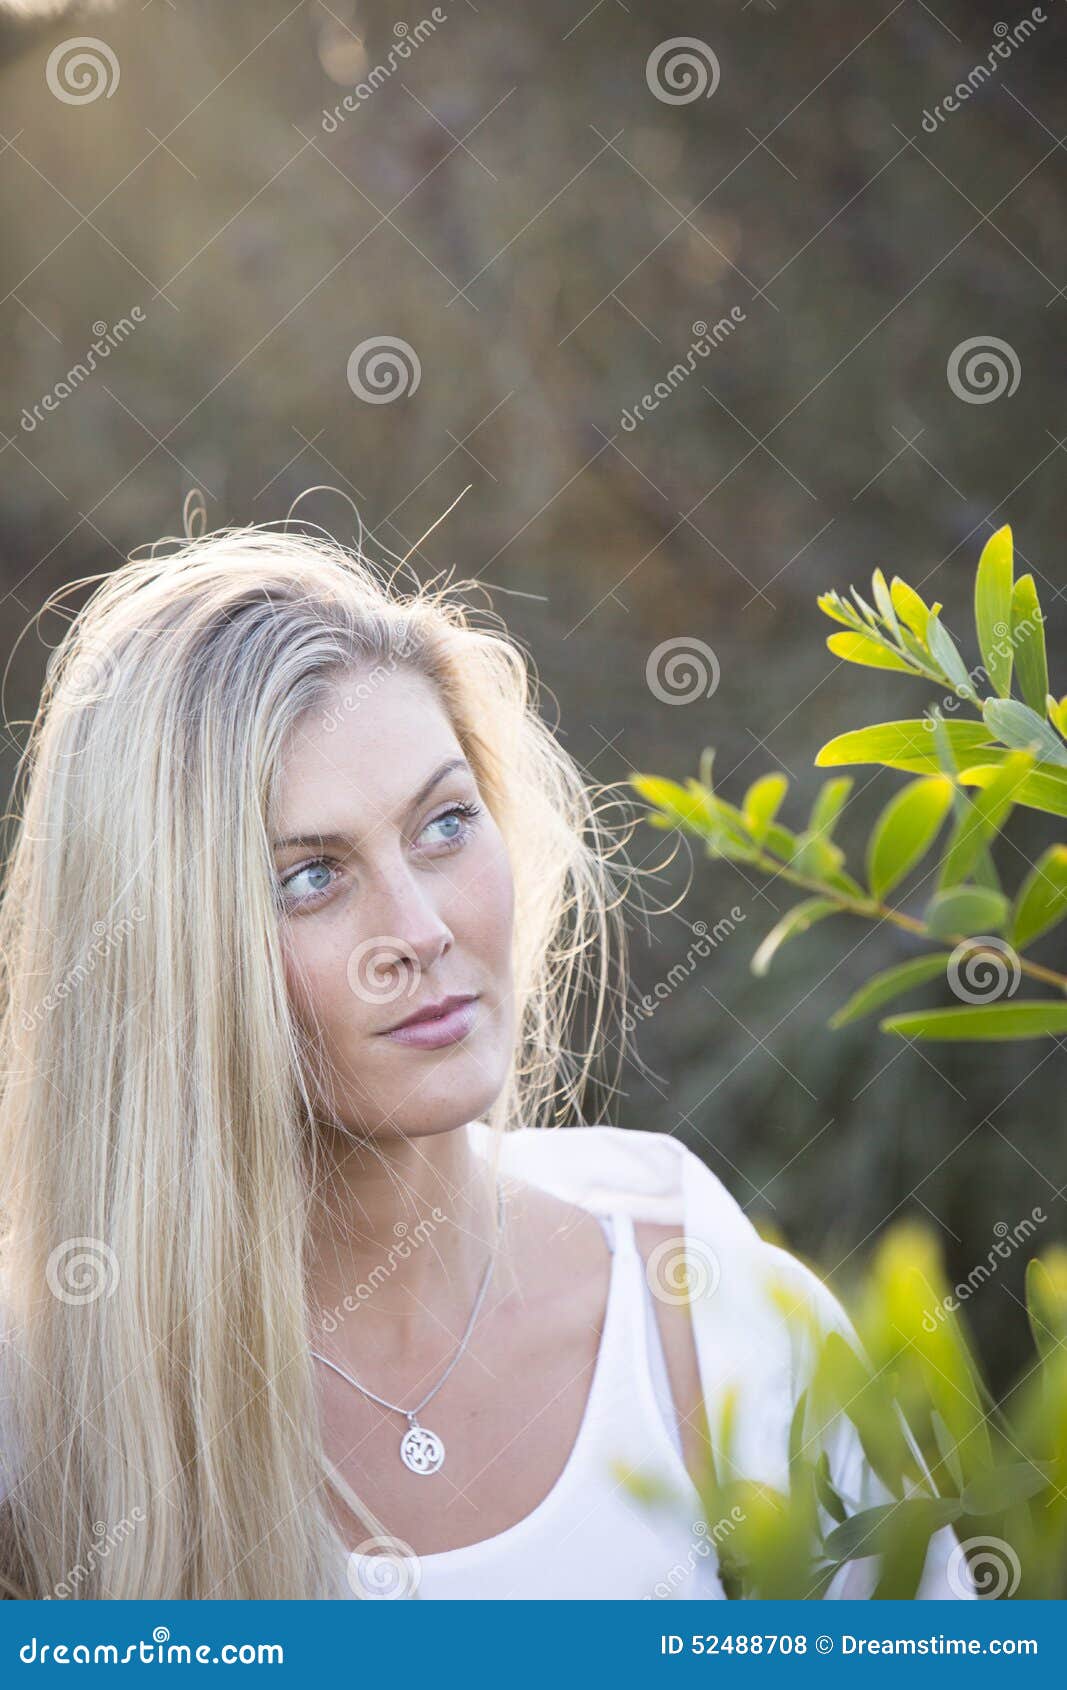 Australian with Long Blond Hair Touching Tree Stock Photo - Image of 52488708